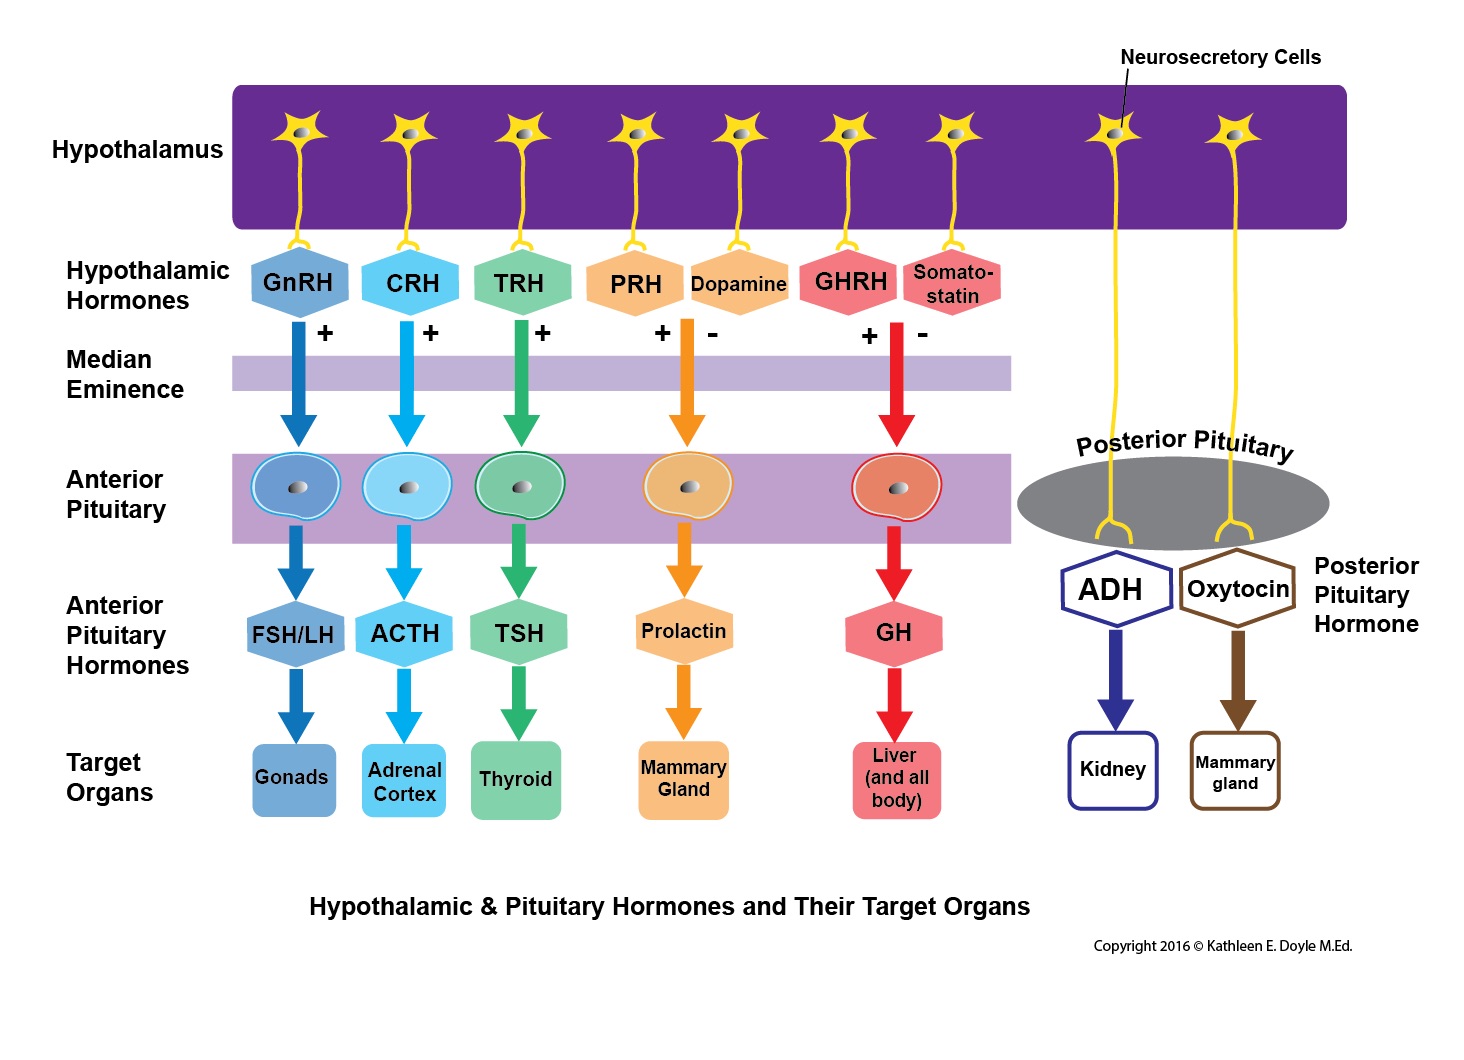 Hypothalamic and Pituitary Hormones and Their Target Organs